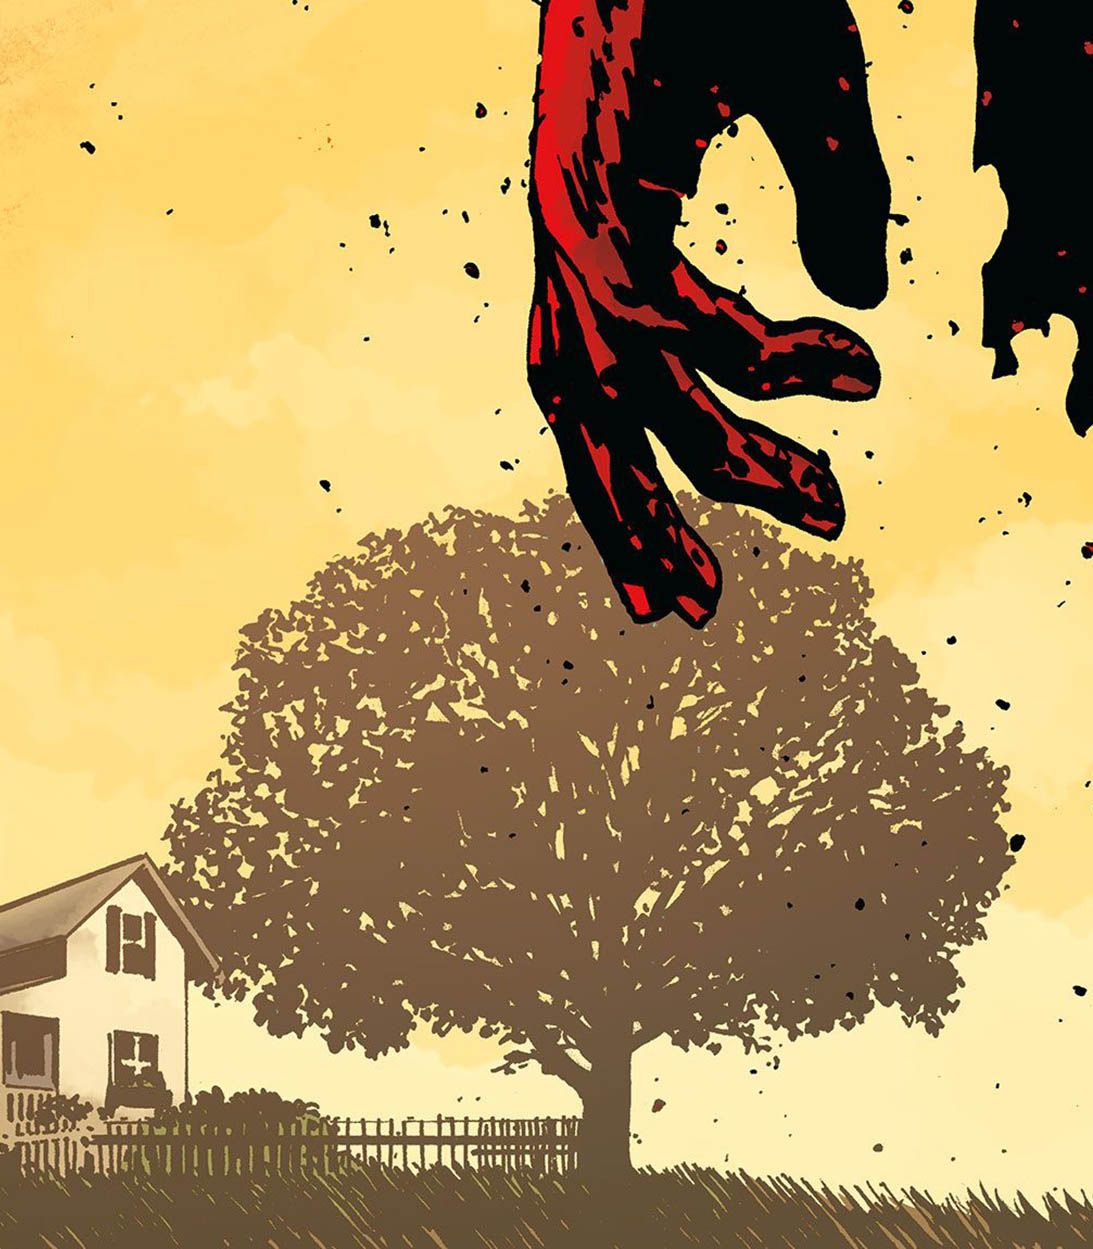 The Walking Dead Issue 193 Cover 1093